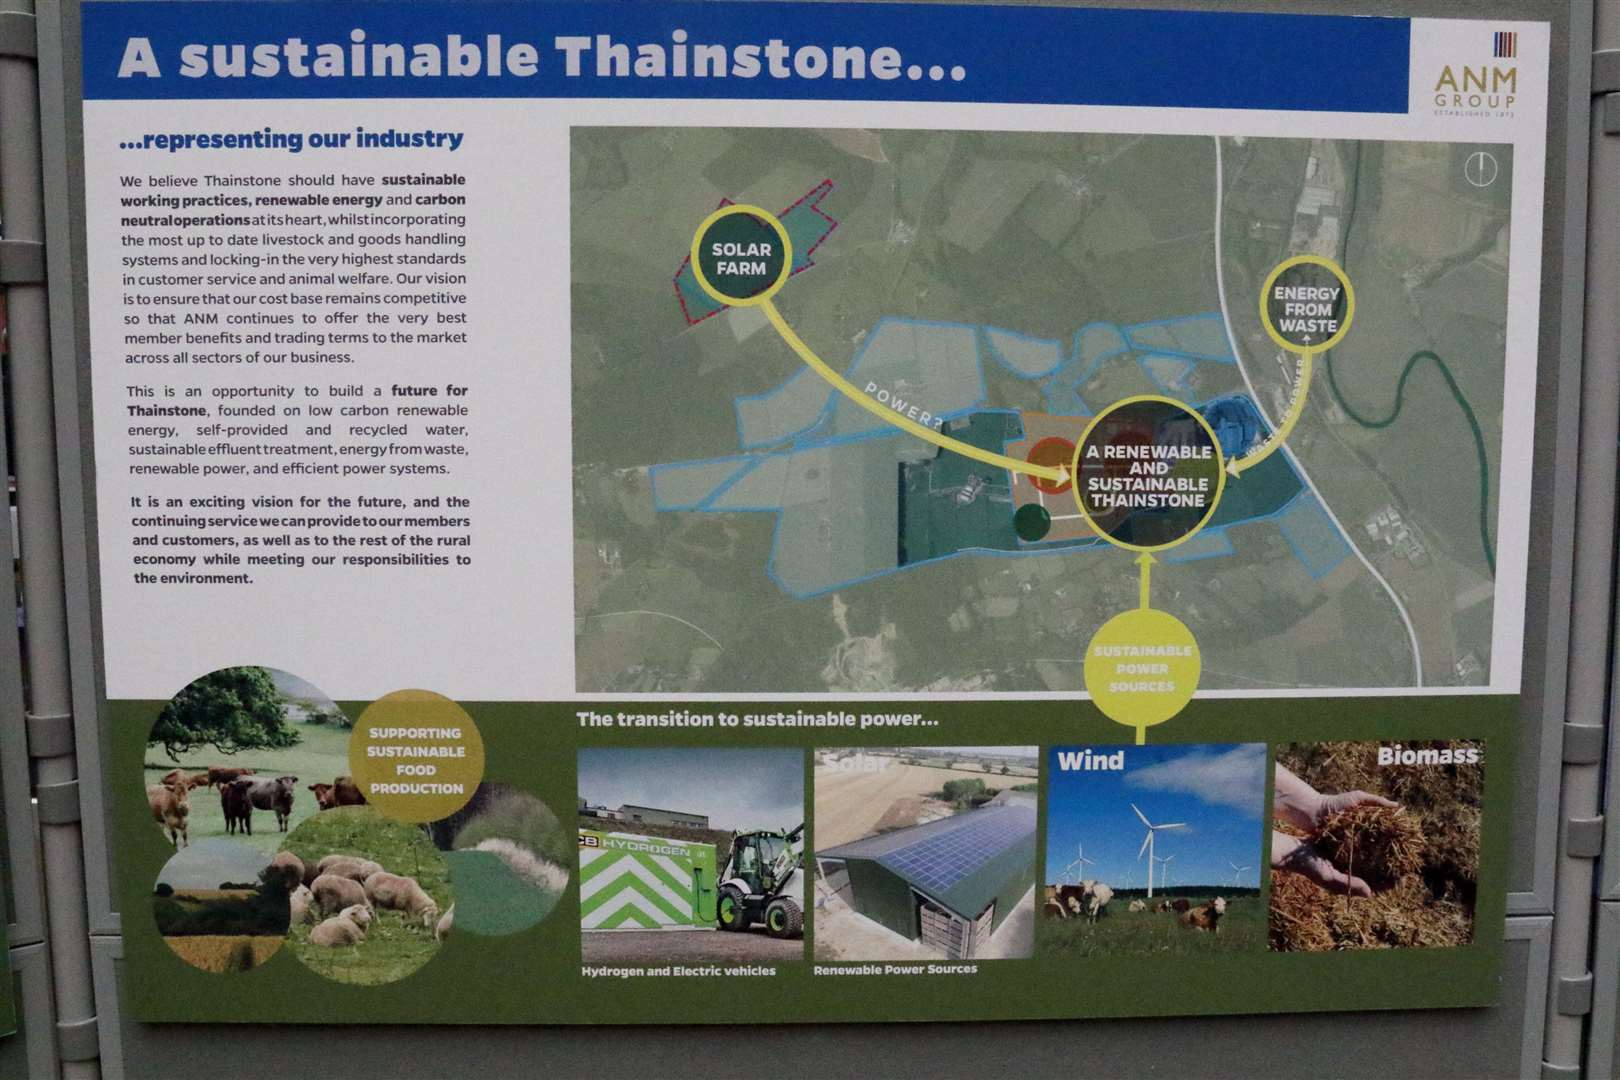 The plan will look at the redevelopment of the existing Thainstone site.